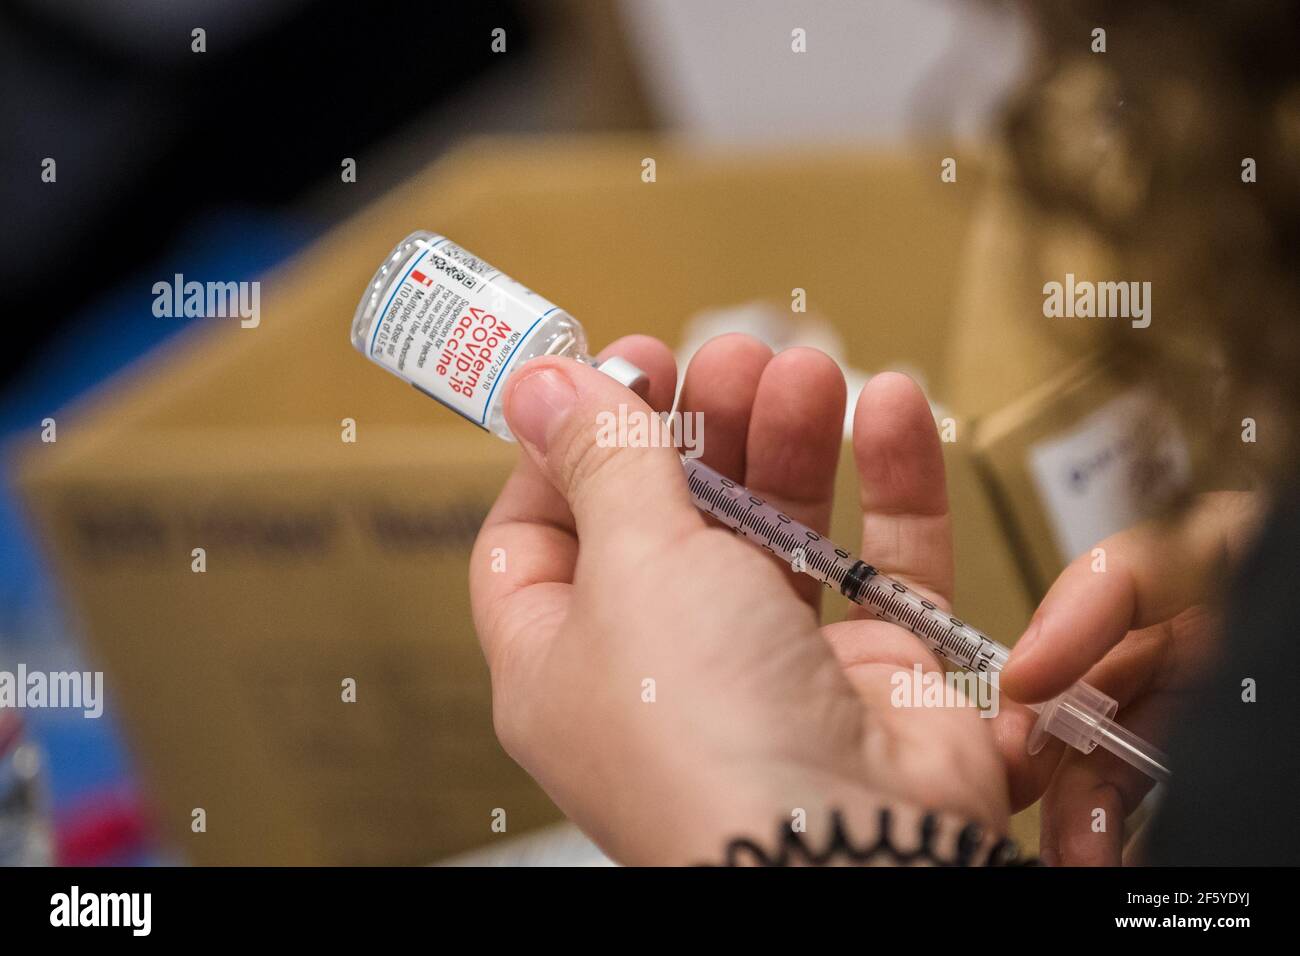 March 28, 2021: Syringes are prepared during a mass COVID-19 vaccination event held by the University of Texas Medical Branch (UTMB Health) at Brazosport College in Lake Jackson, Texas.  (Photo by Prentice C. James/CSM/Sipa USA) Stock Photo